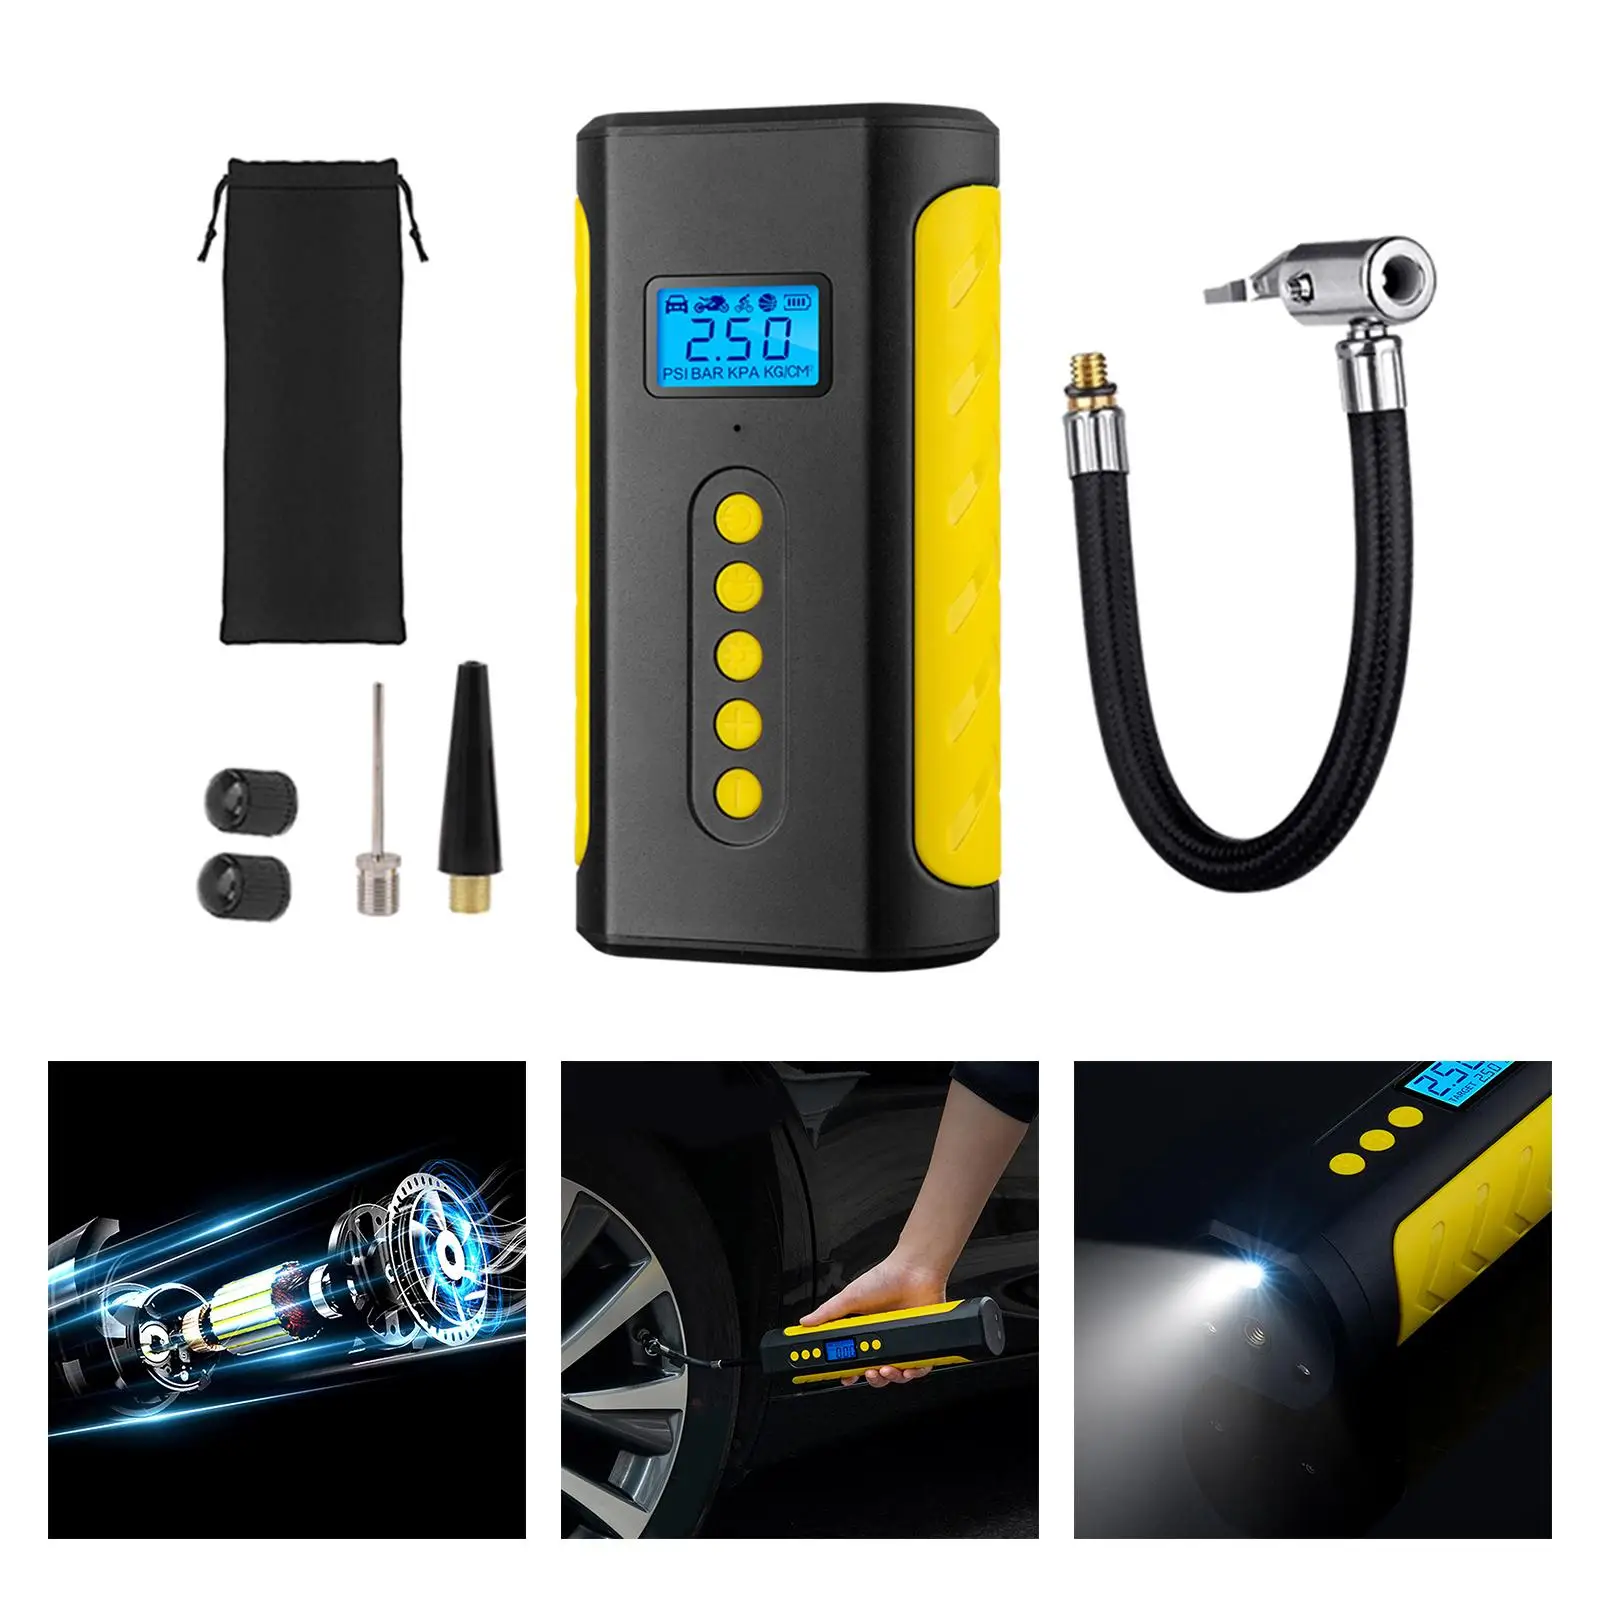 Mini Portable Air Compressor Fast Inflation Intelligent Digital Display Tire Inflator for Bicycles Motorcycle Tires Truck